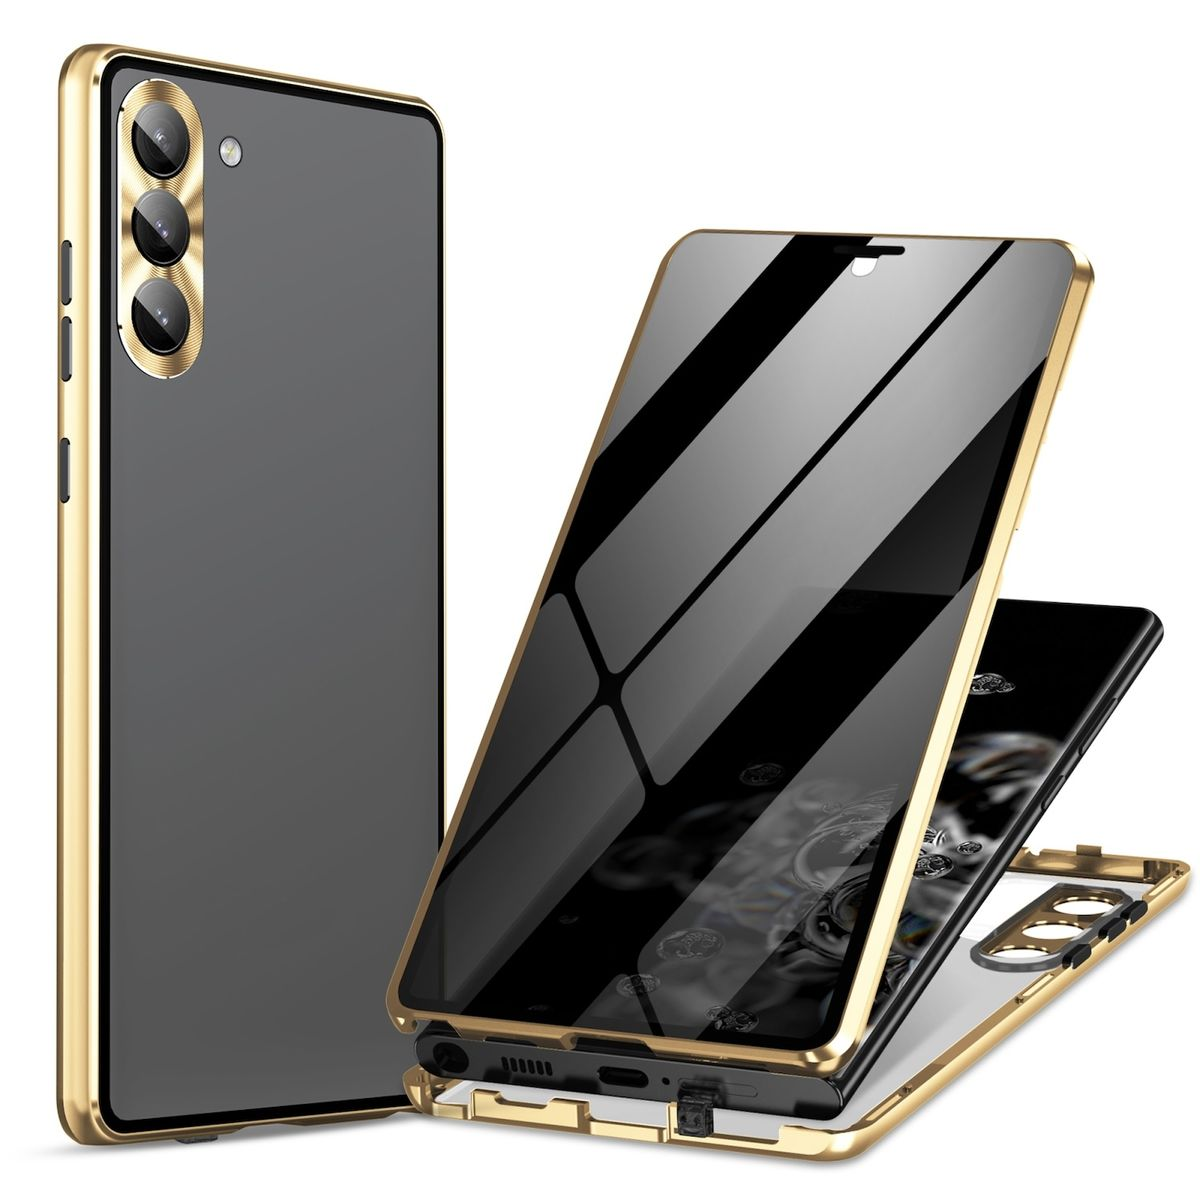 WIGENTO Beidseitiger Transparent Privacy Gold / Grad S24, Glas Samsung, Magnet Galaxy Cover, Hülle, Full 360 